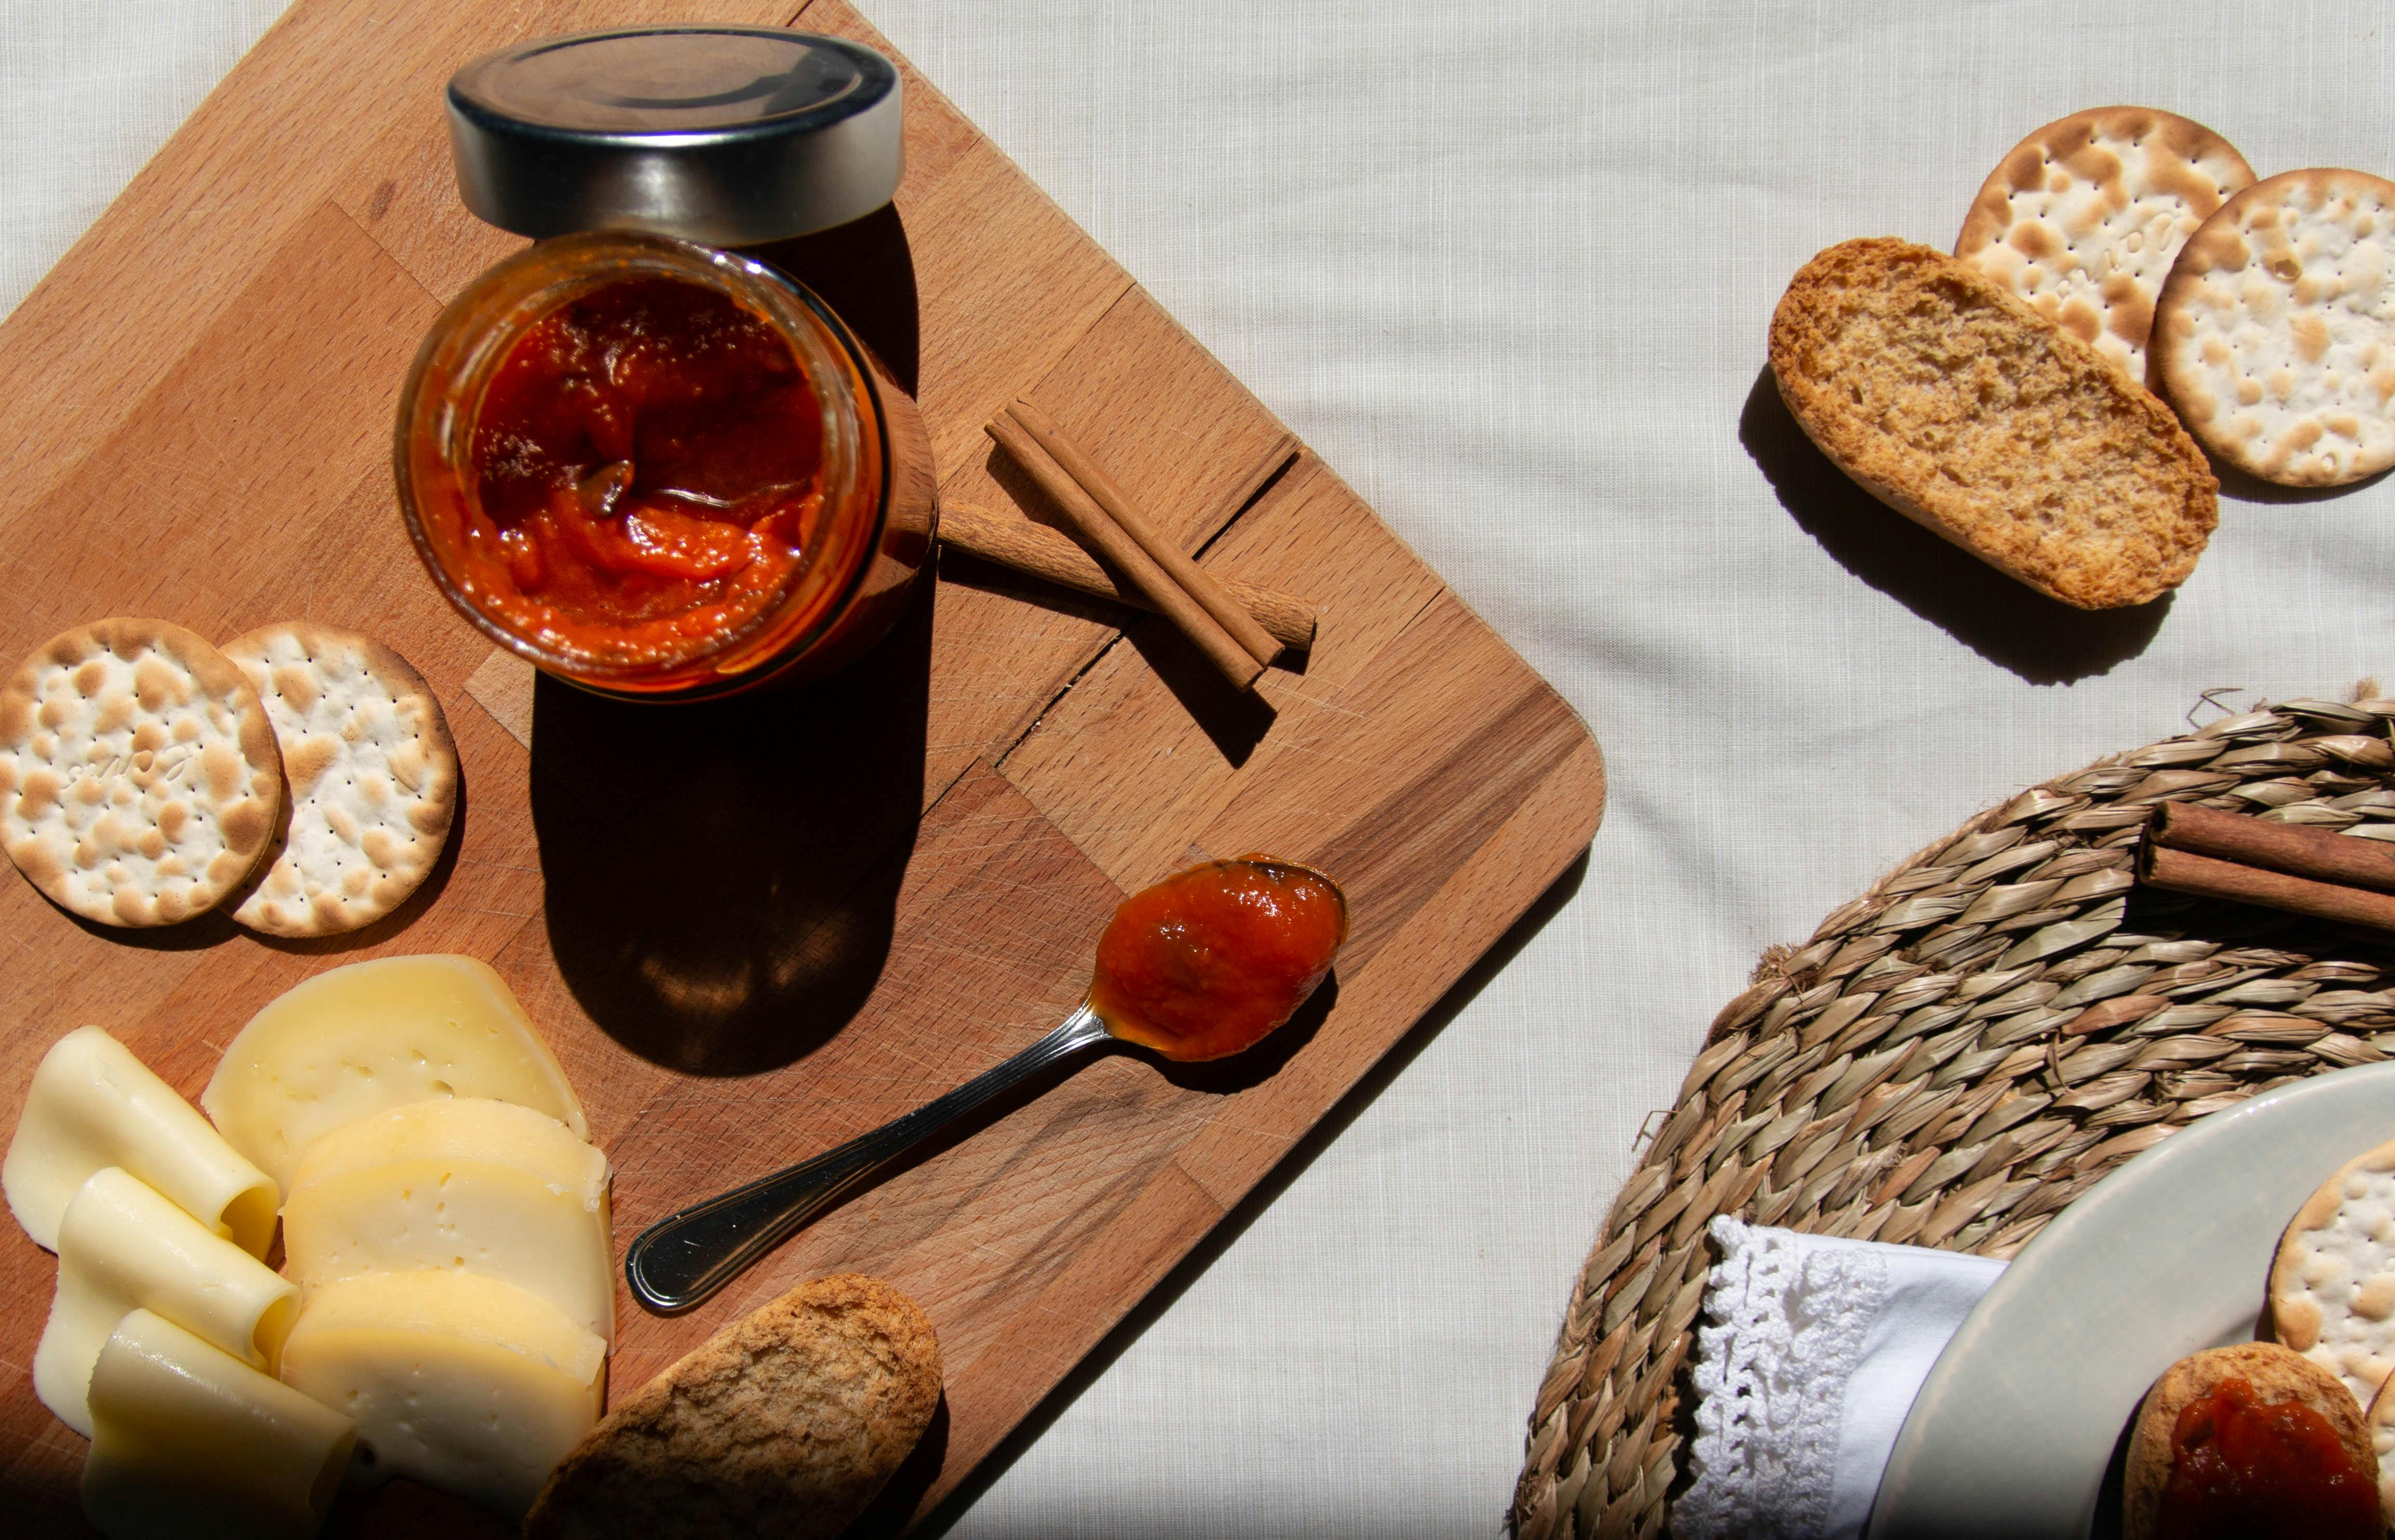 red sauce in a glass jar and on a spoon on a wooden board